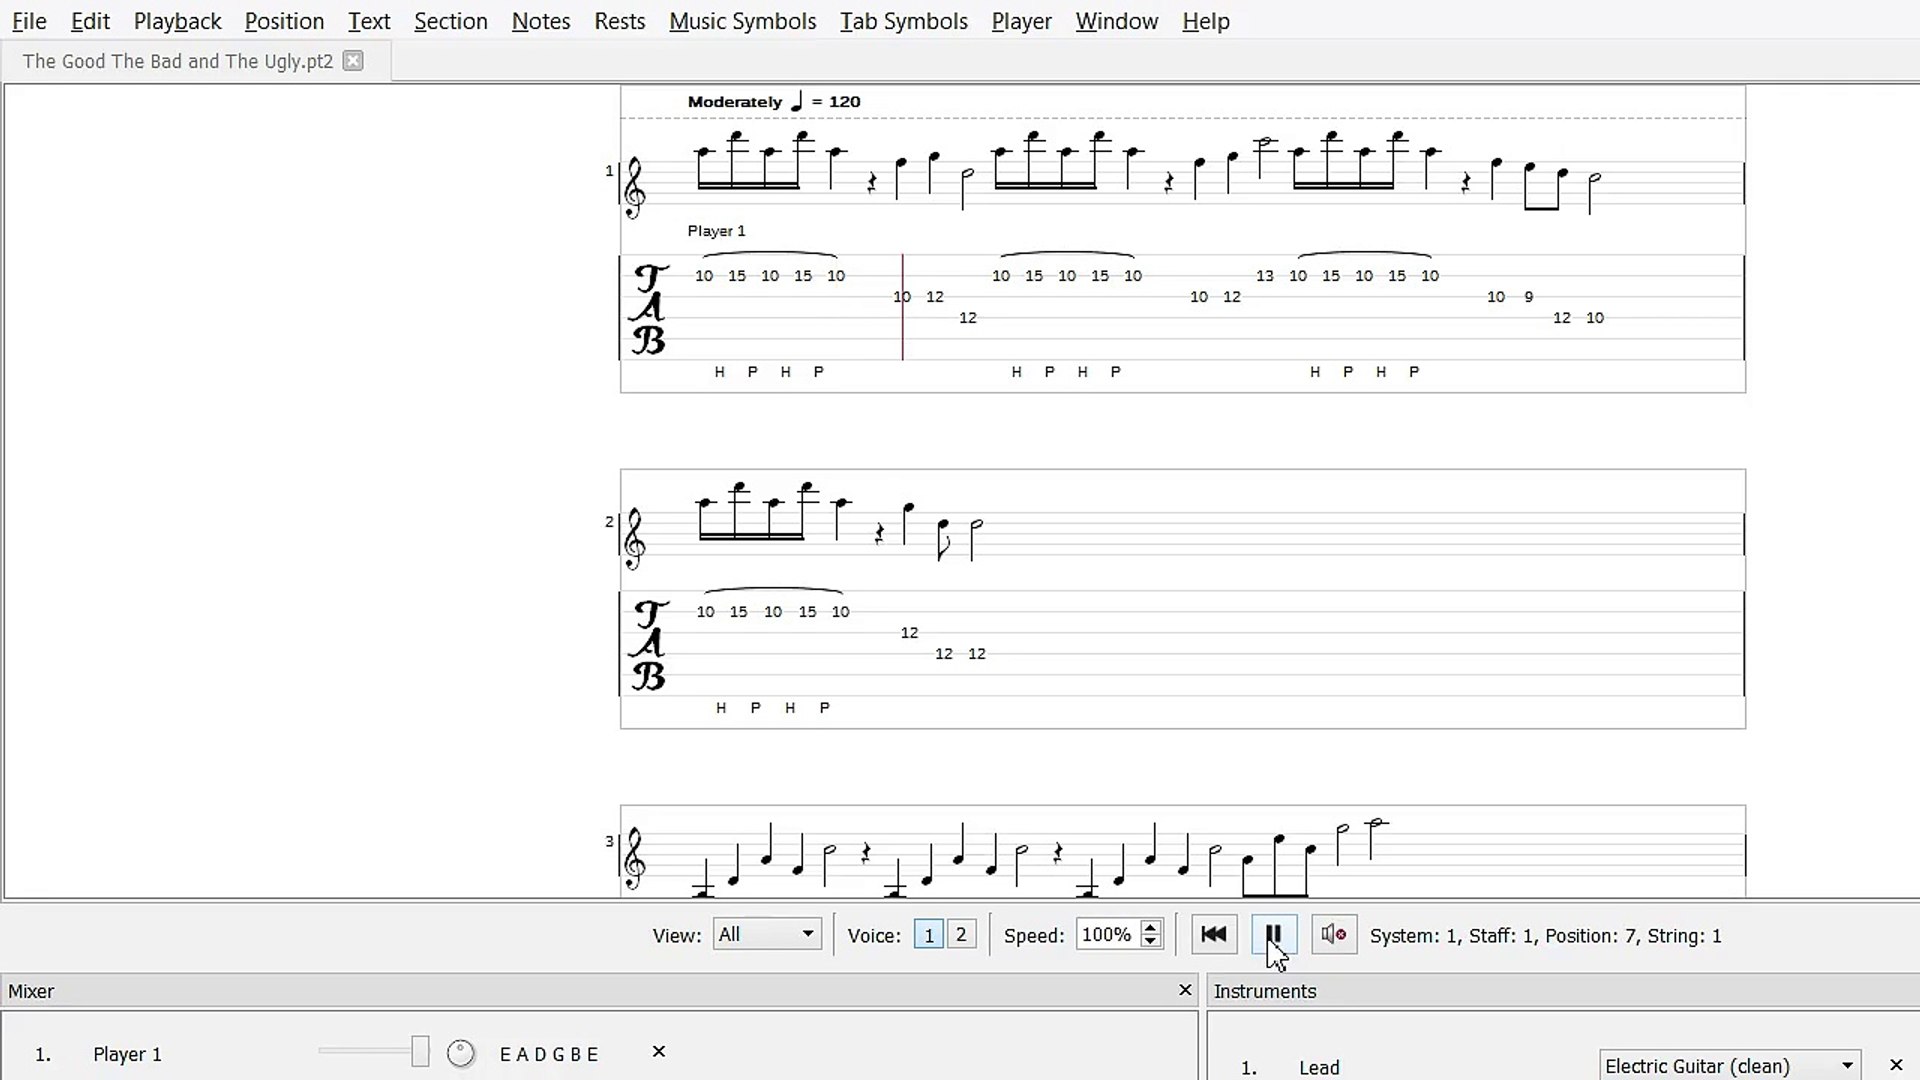 The Good The Bad And The Ugly Theme Guitar Tabs Video Dailymotion.